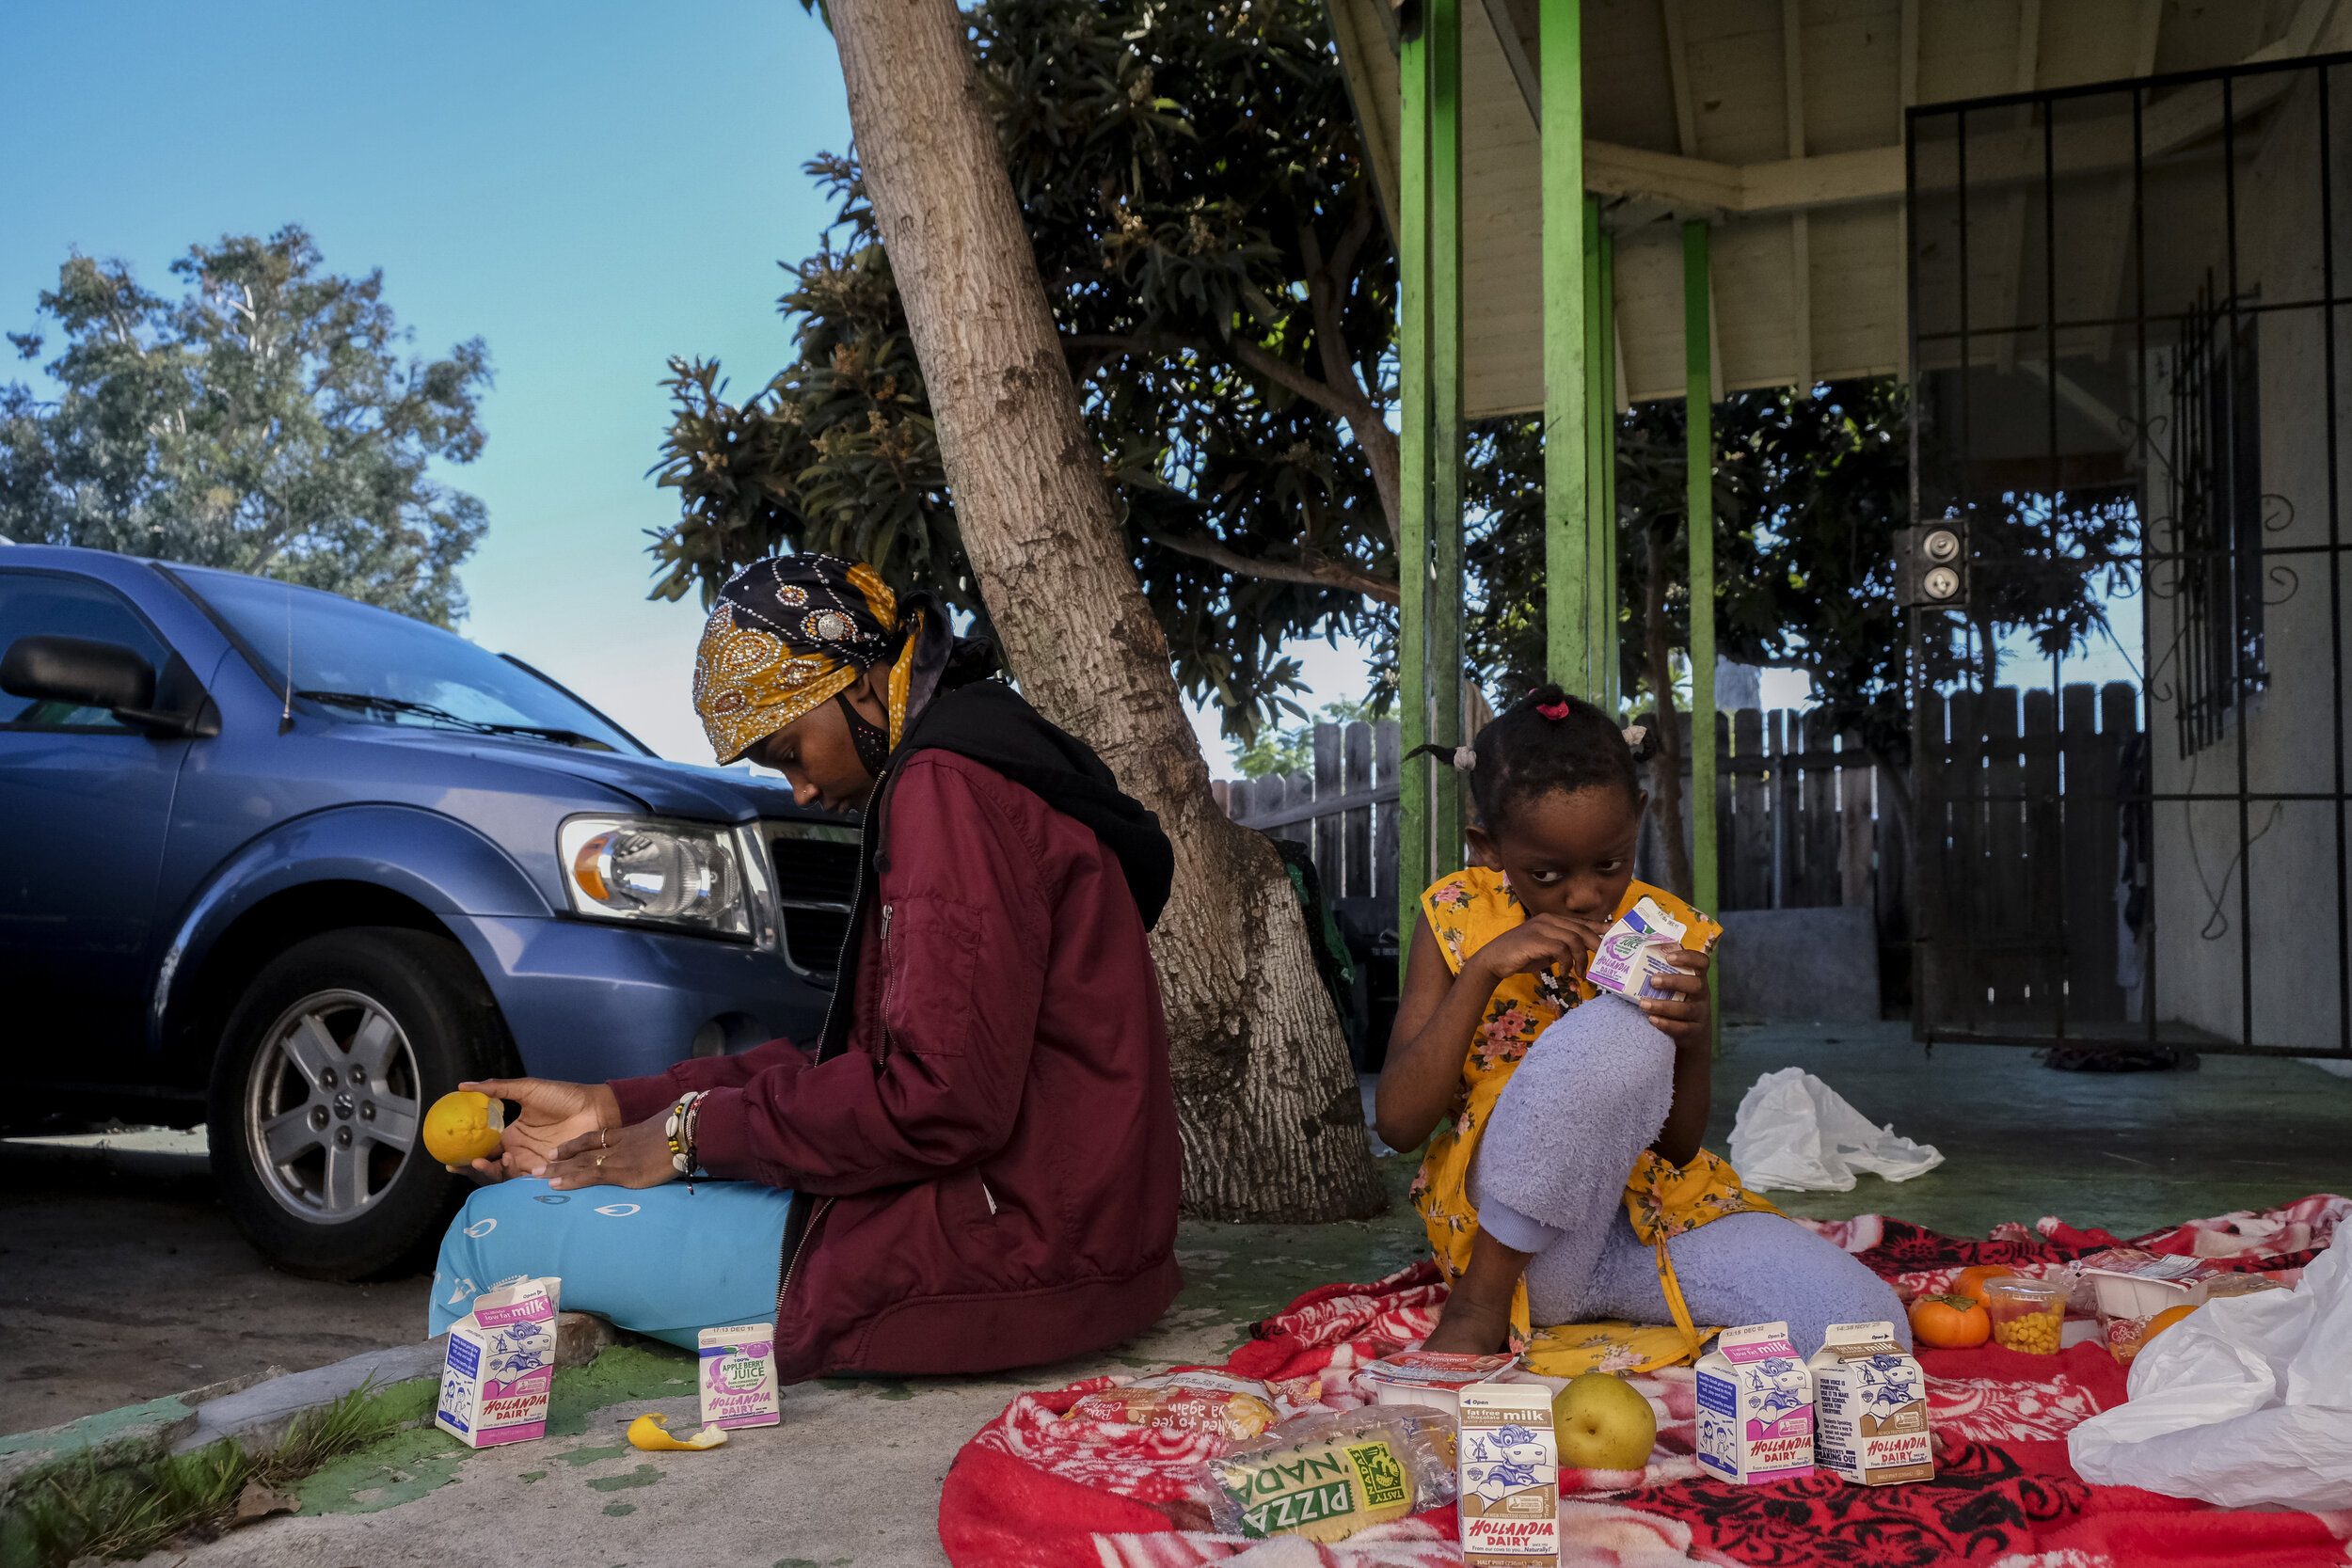  USA, San Diego, CA, December 1, 2020.&nbsp; Famo, 31, and her daughter Sadiya Musa, 7, picnic on their porch with lunches provided by San Diego Unified School District. The family picks up meals for a chance to take a break outside after the childre